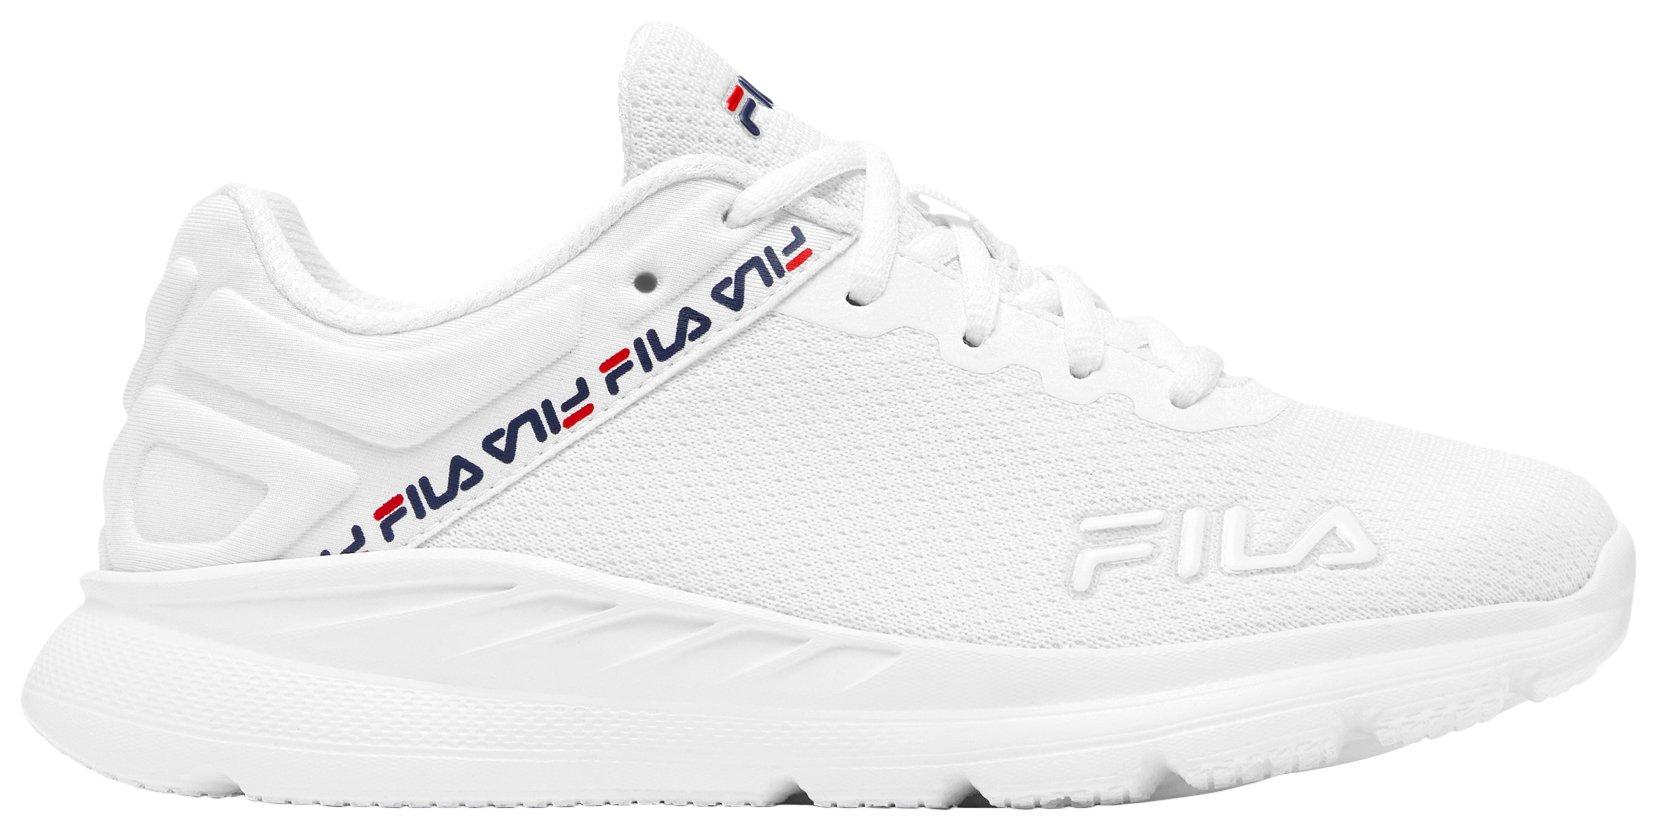 Fila Womens Lightspin Athletic Shoes